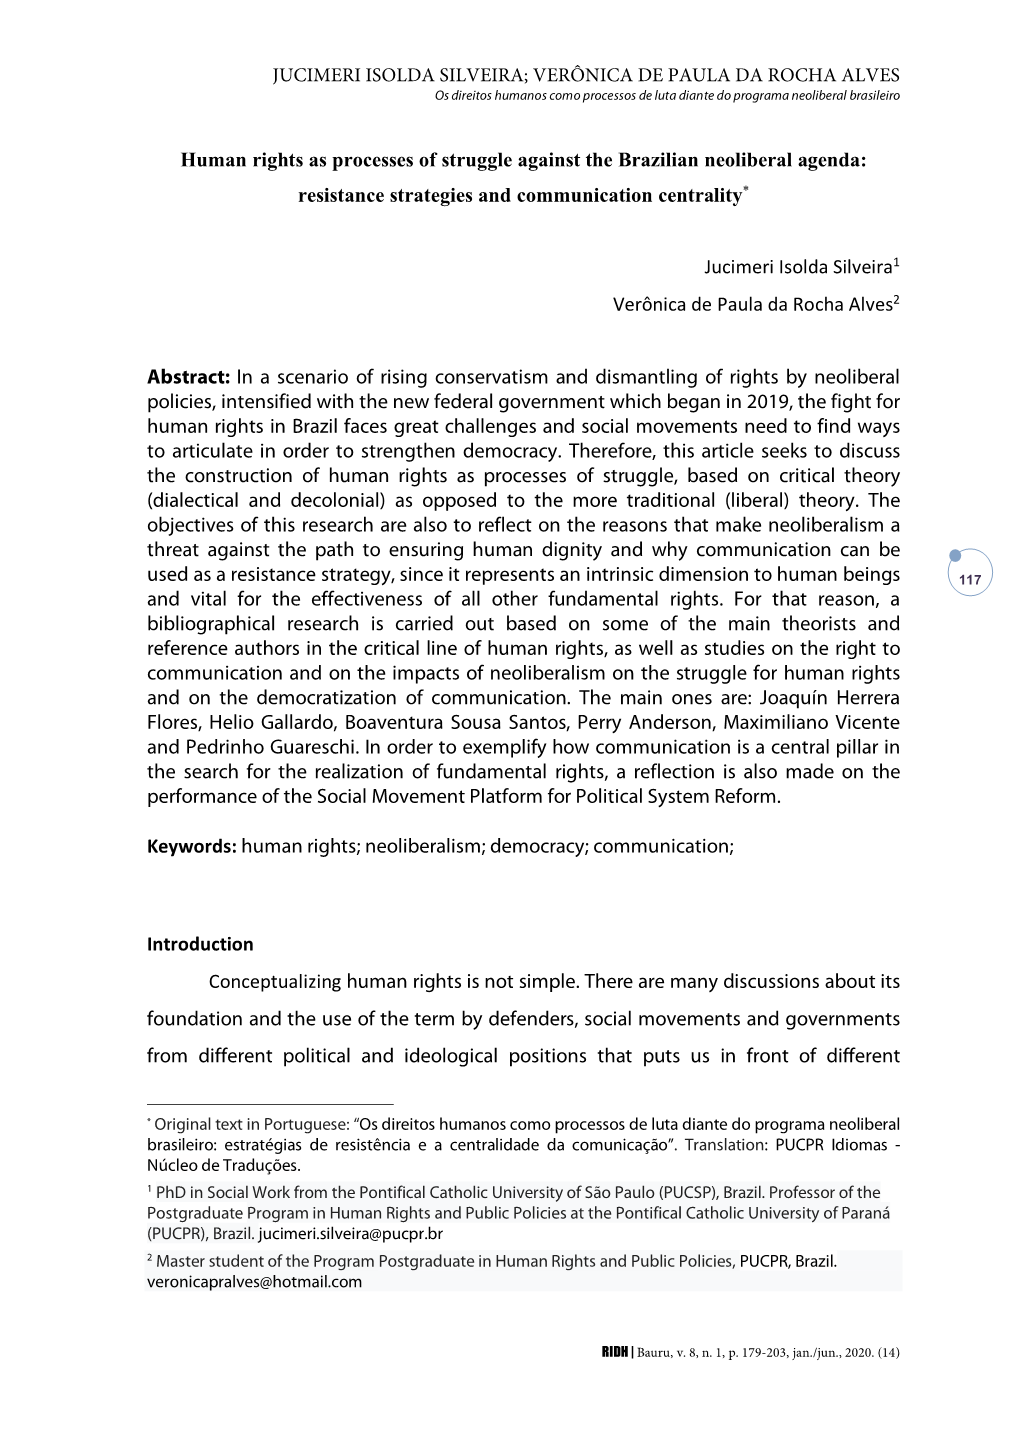 Human Rights As Processes of Struggle Against the Brazilian Neoliberal Agenda: Resistance Strategies and Communication Centrality*